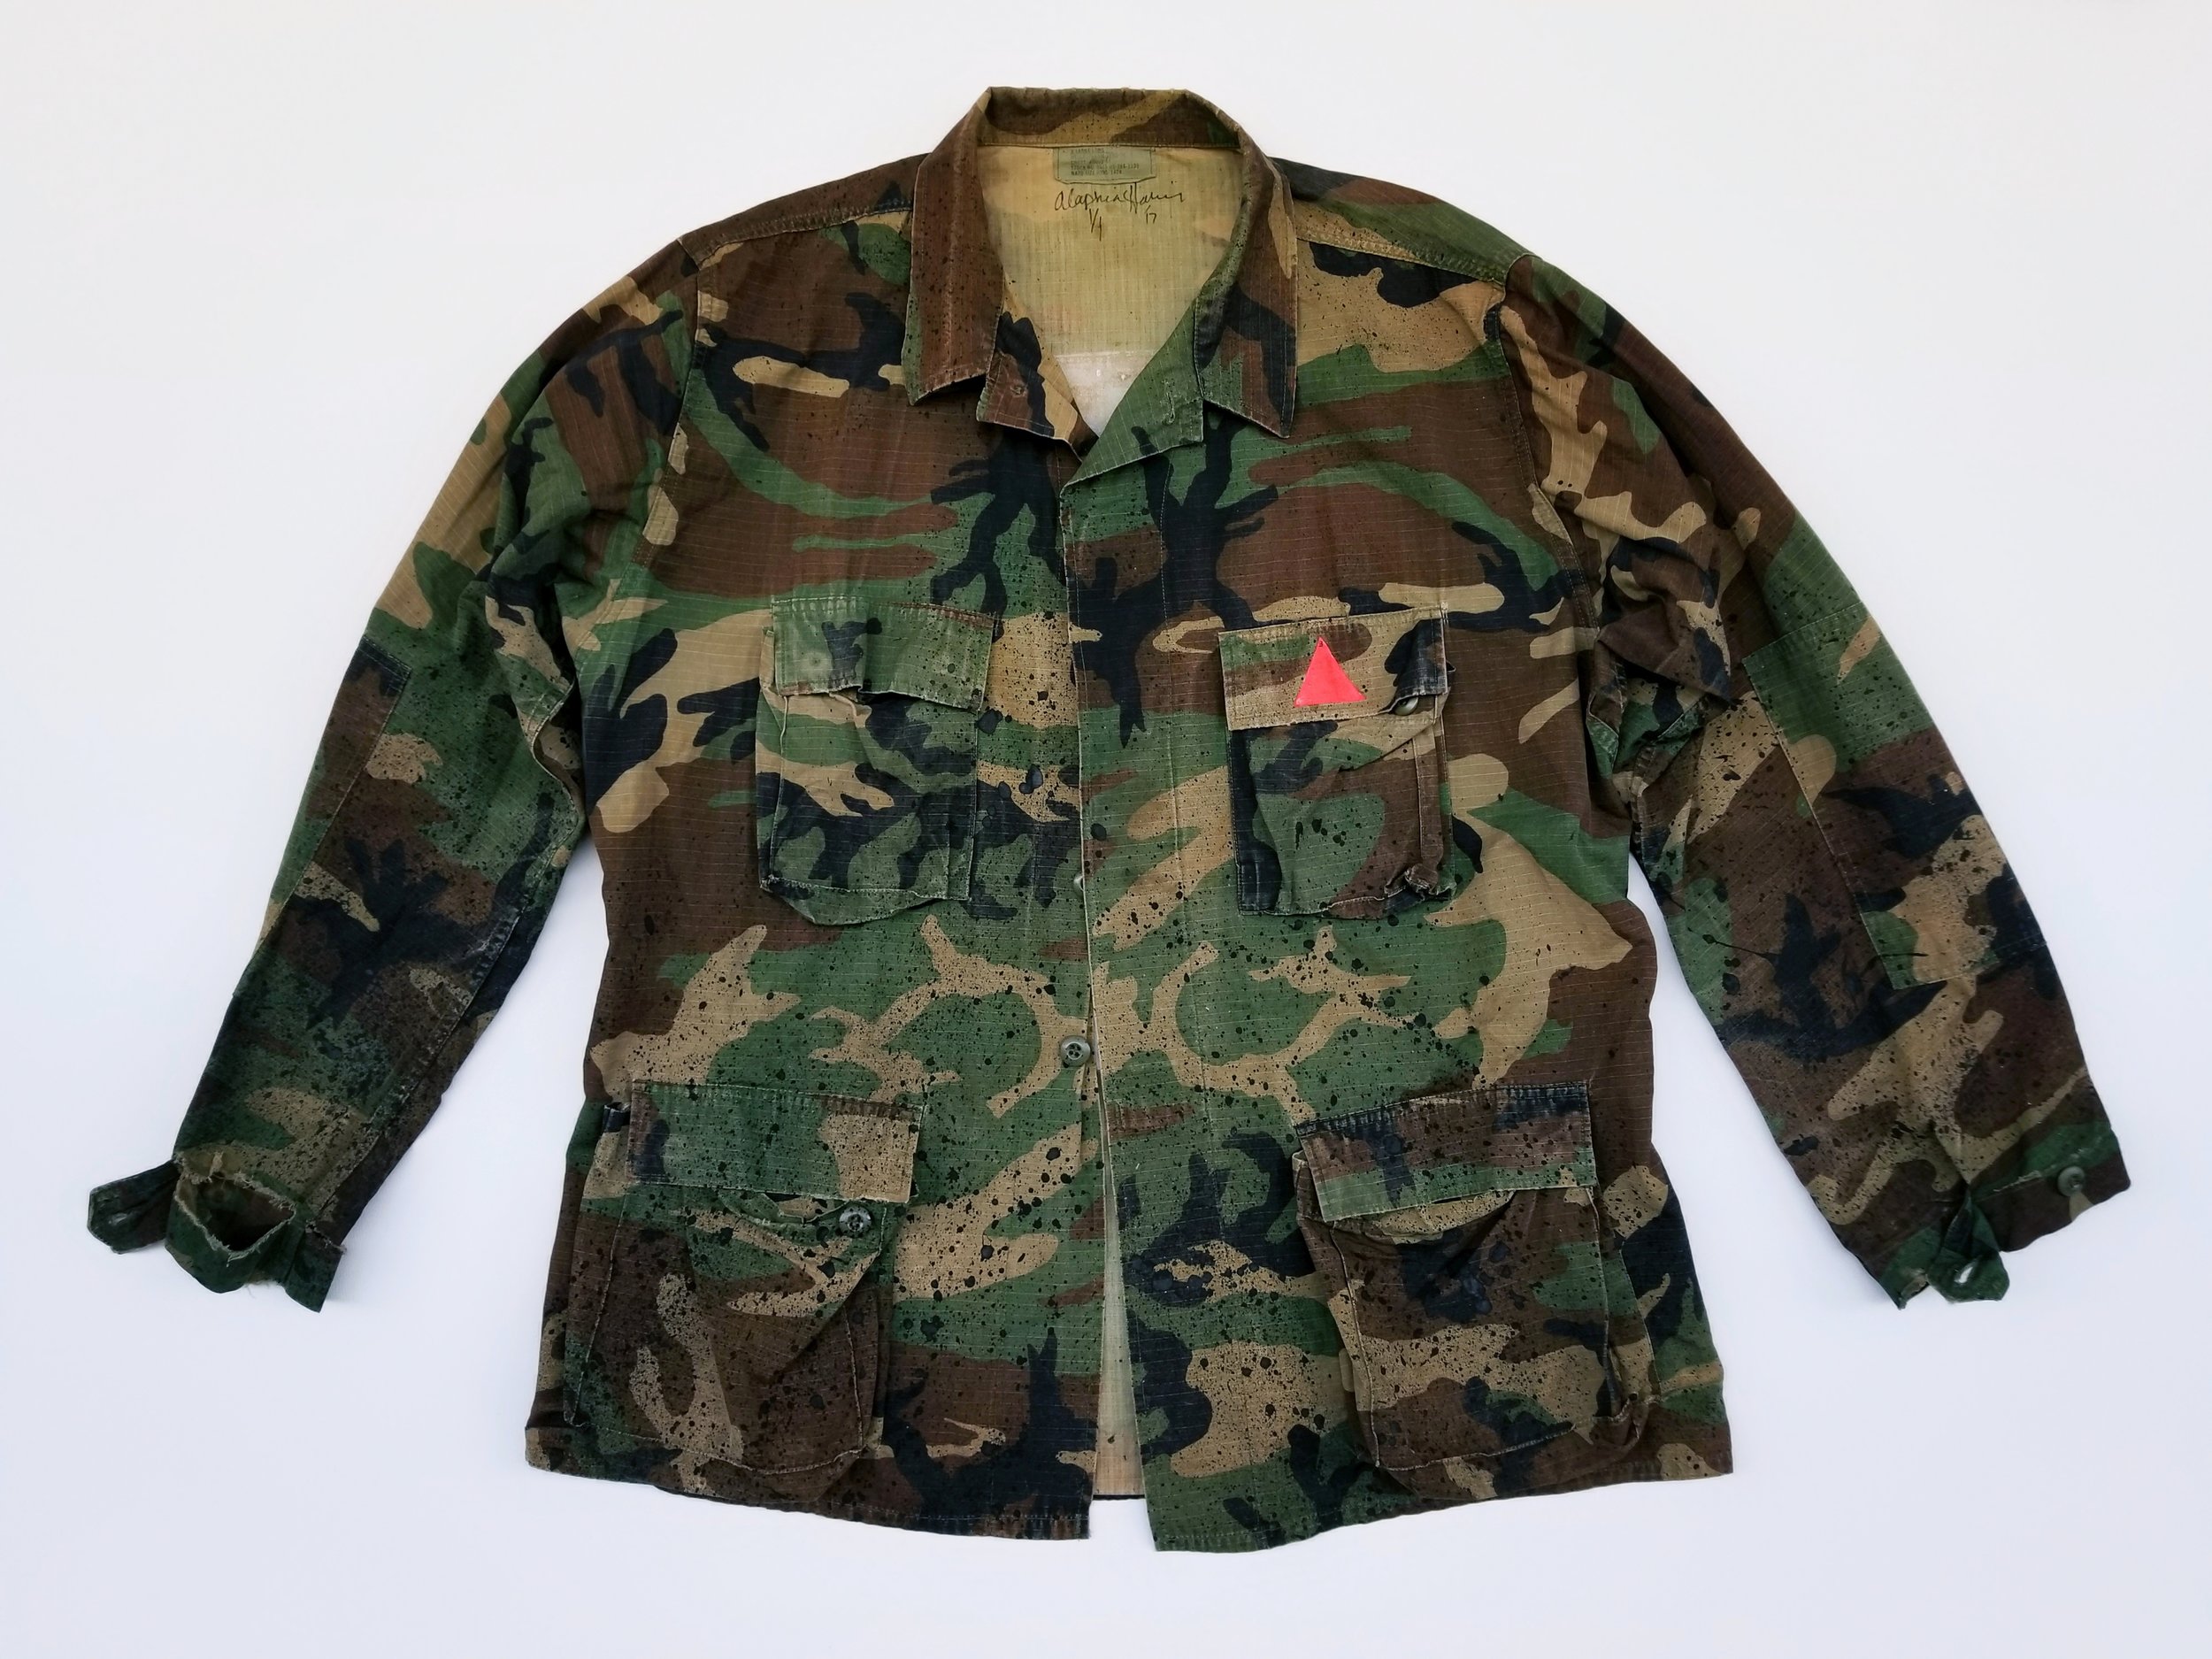 "The Constitution Camo" Jacket